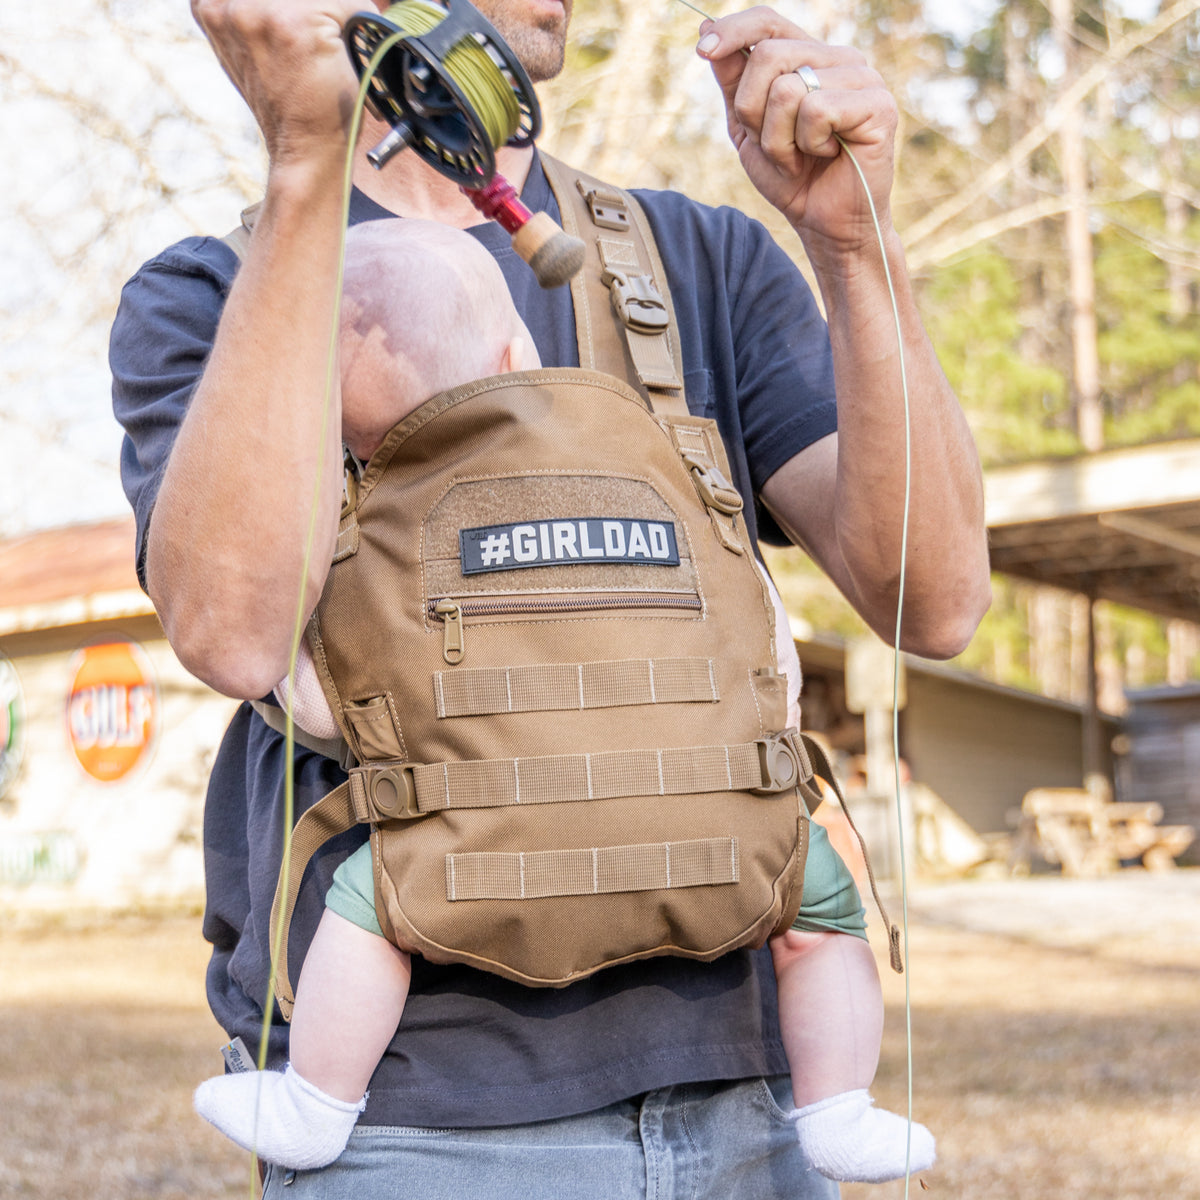 #GIRLDAD Name Tape Patches | Tactical Baby Gear®